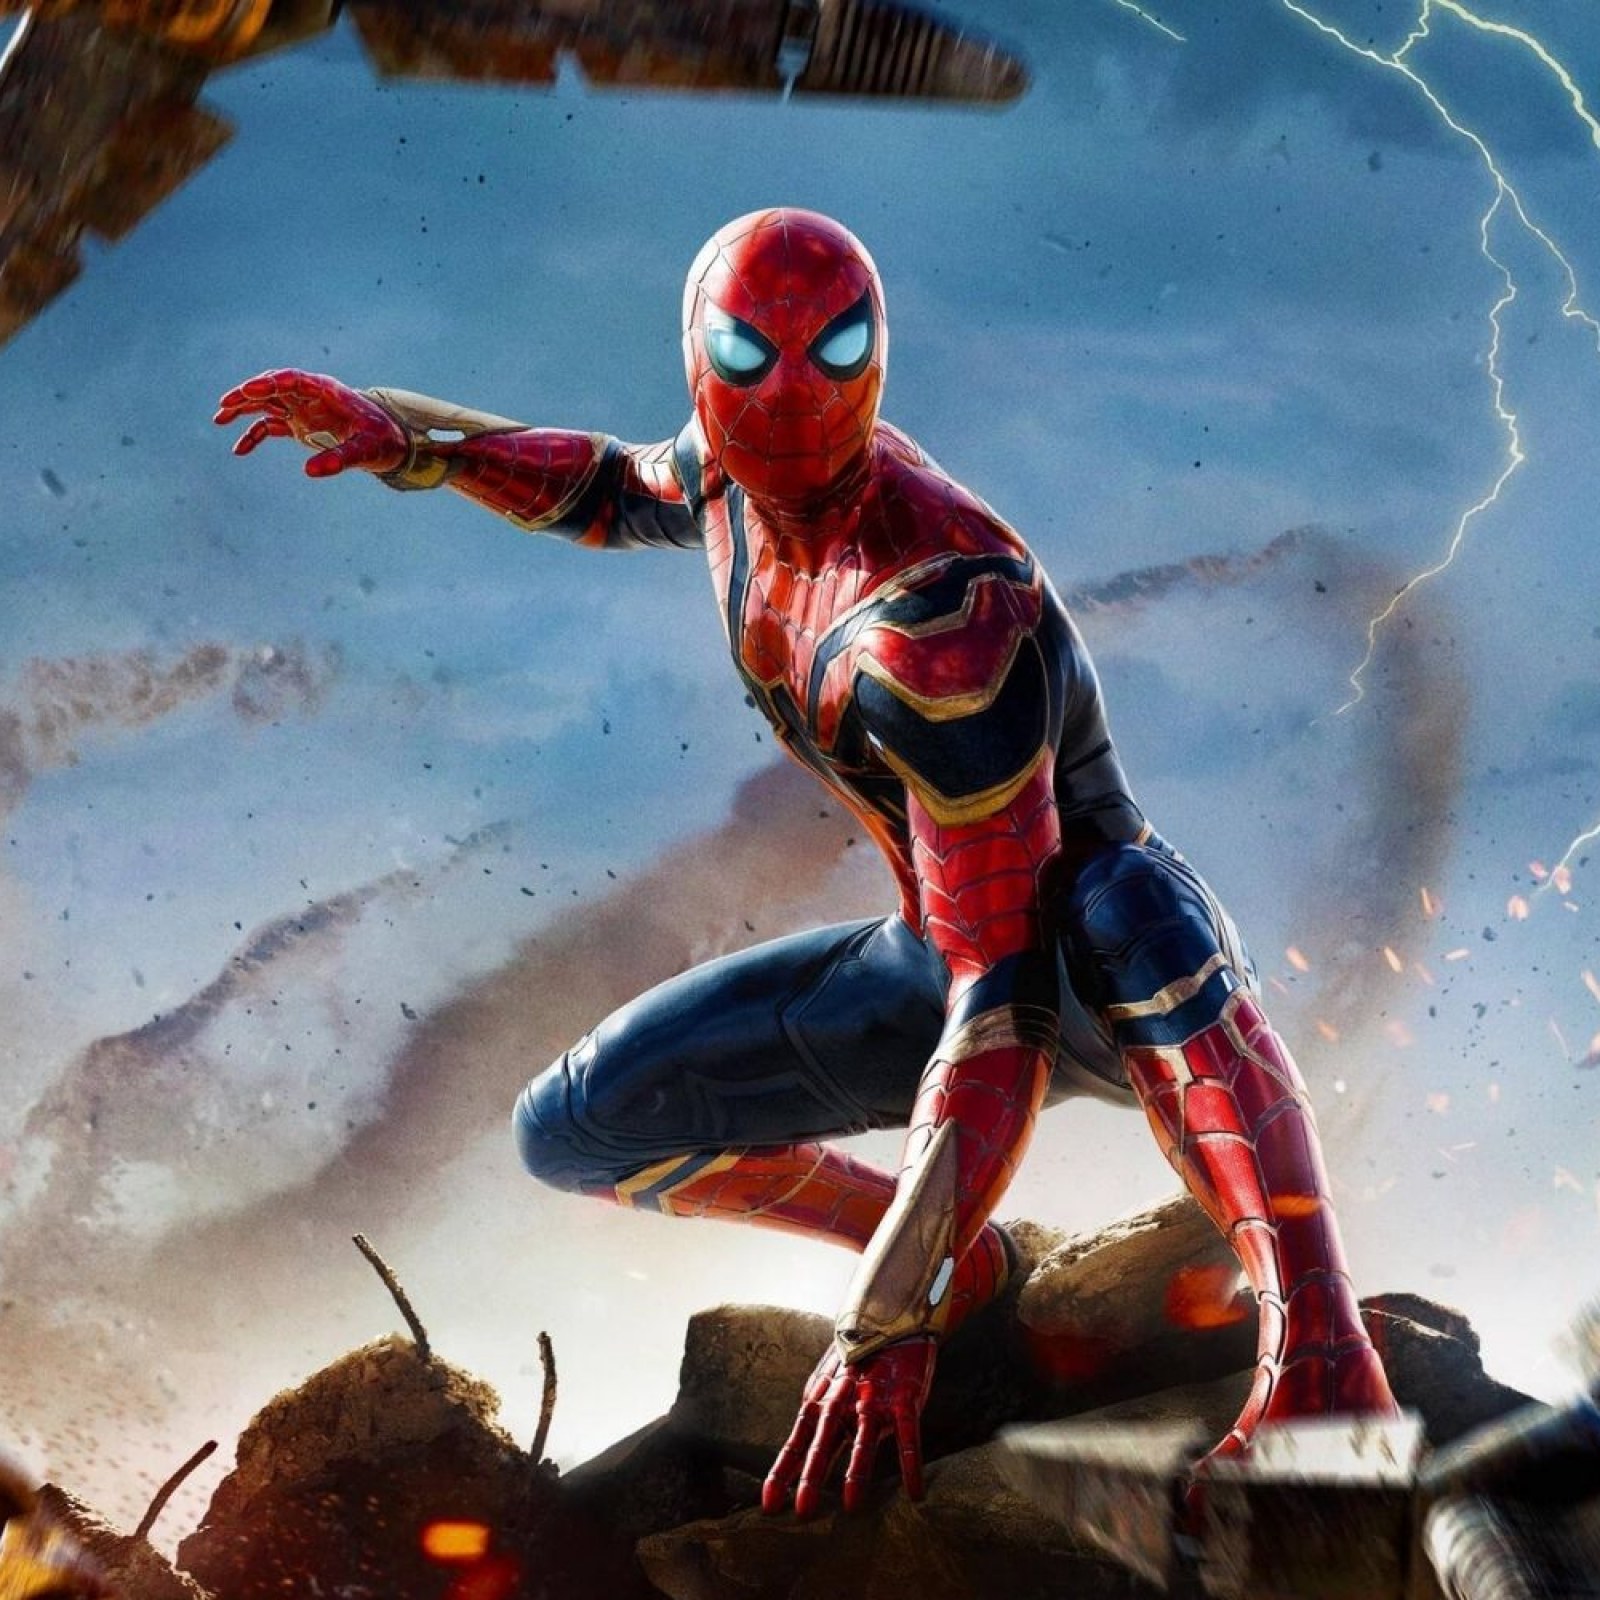 Multiverse Theory Explained Ahead of 'Spider-Man: No Way Home' Release